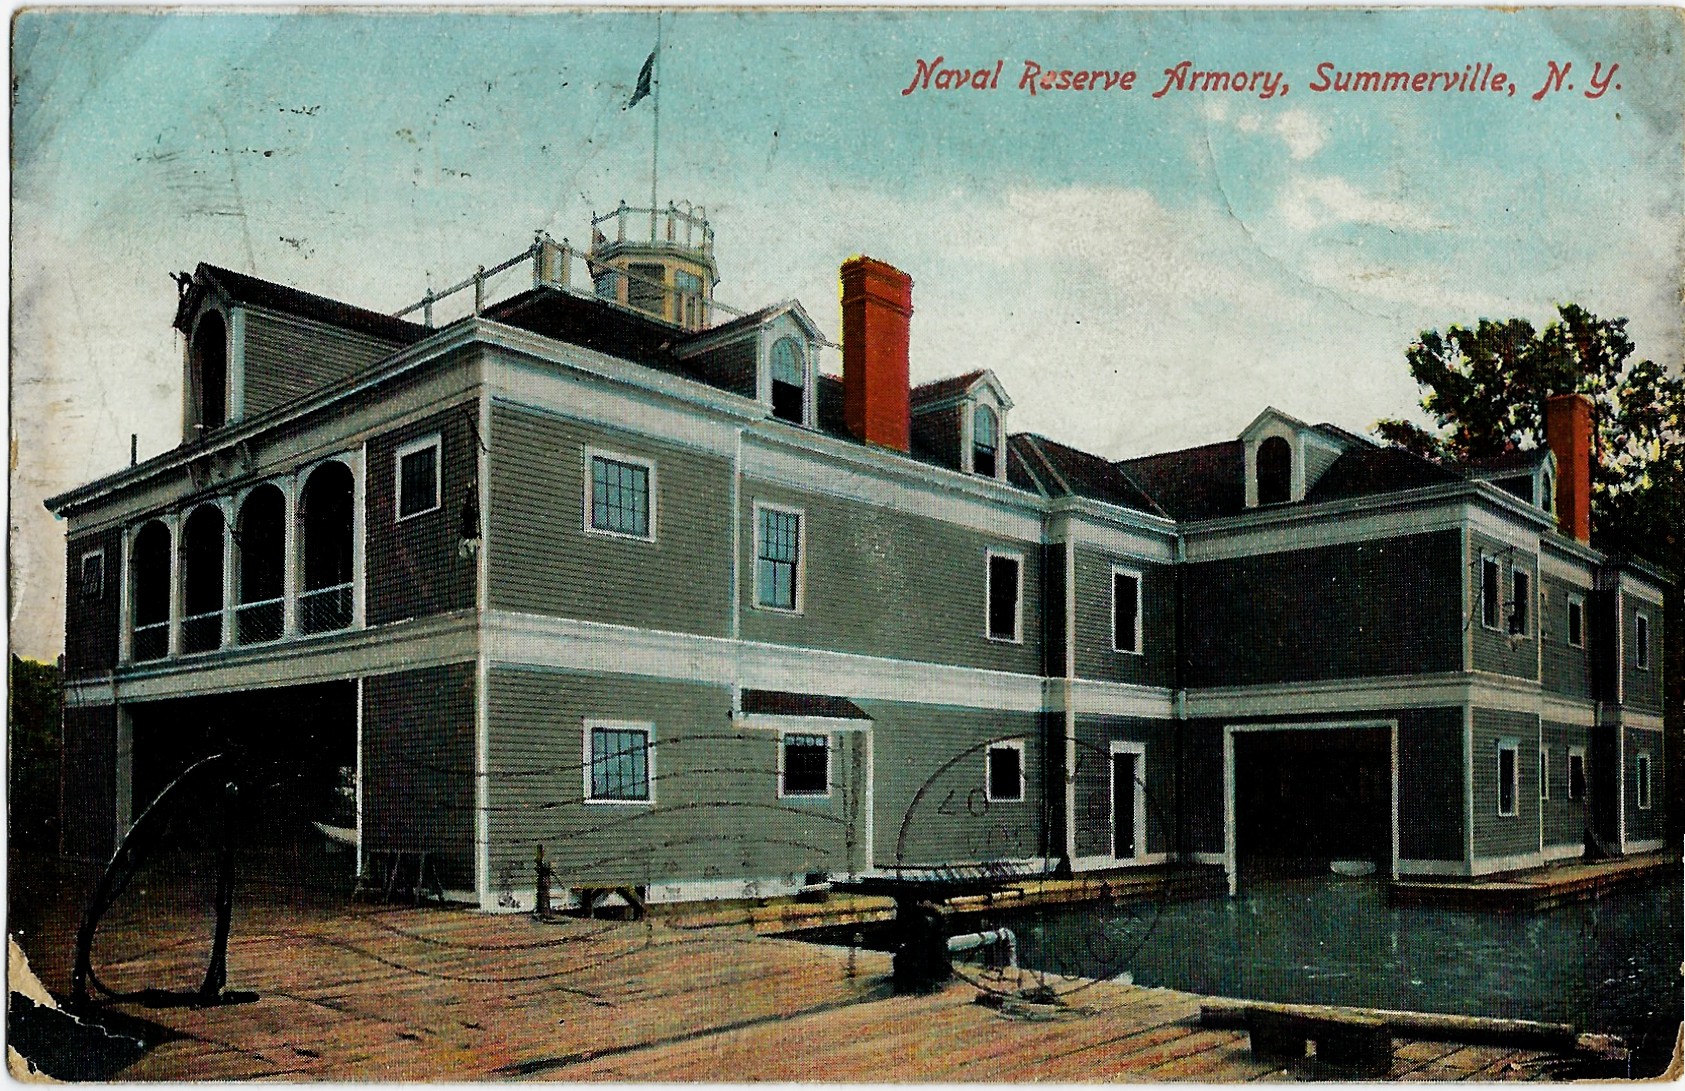 Naval Reserve Armory, Summerville, N.Y. Postcard PM 1907